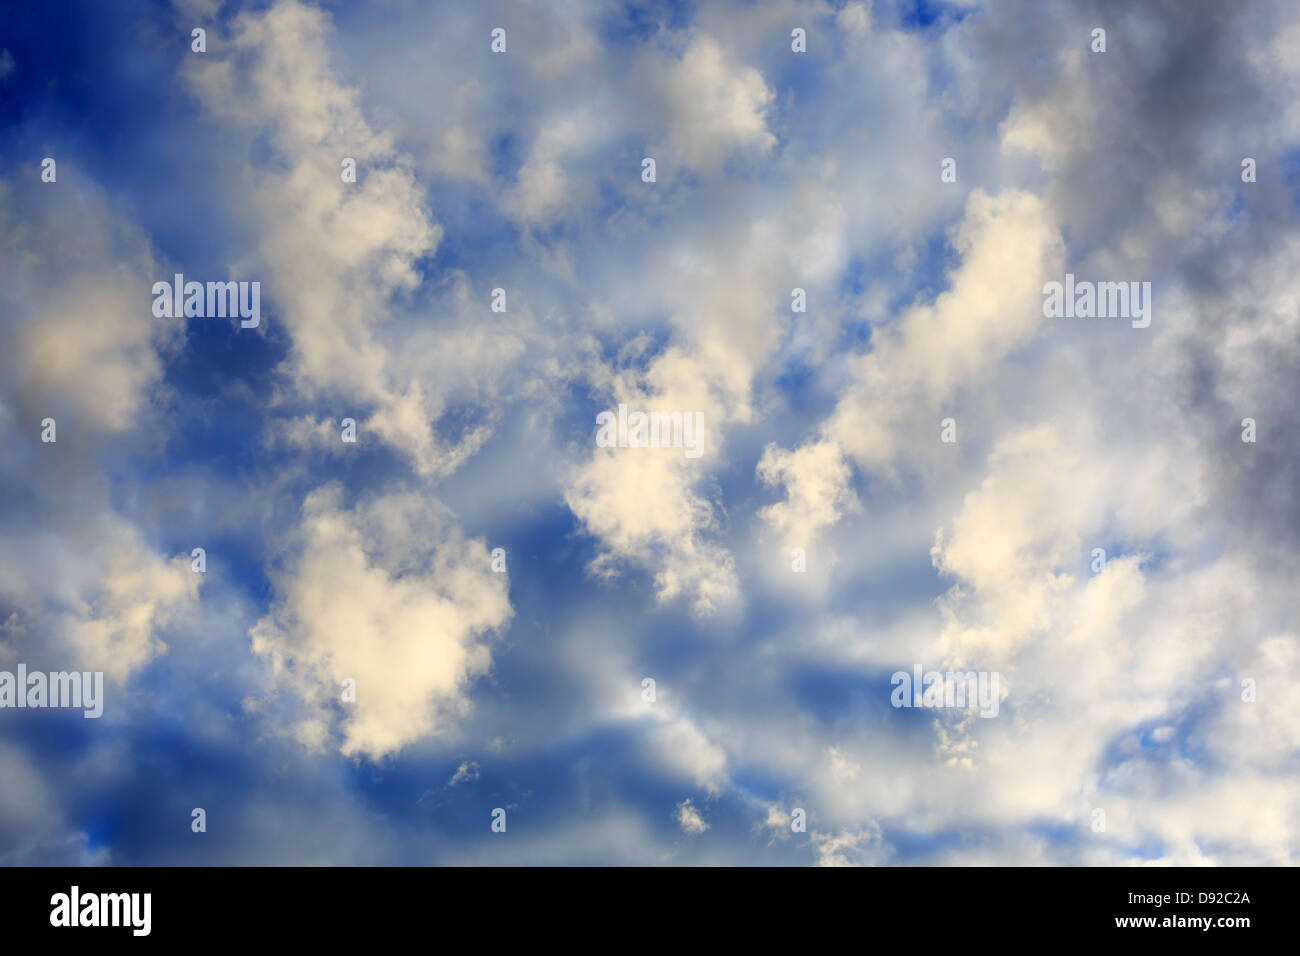 Horizontally framed view of some early morning clouds overhead. Stock Photo